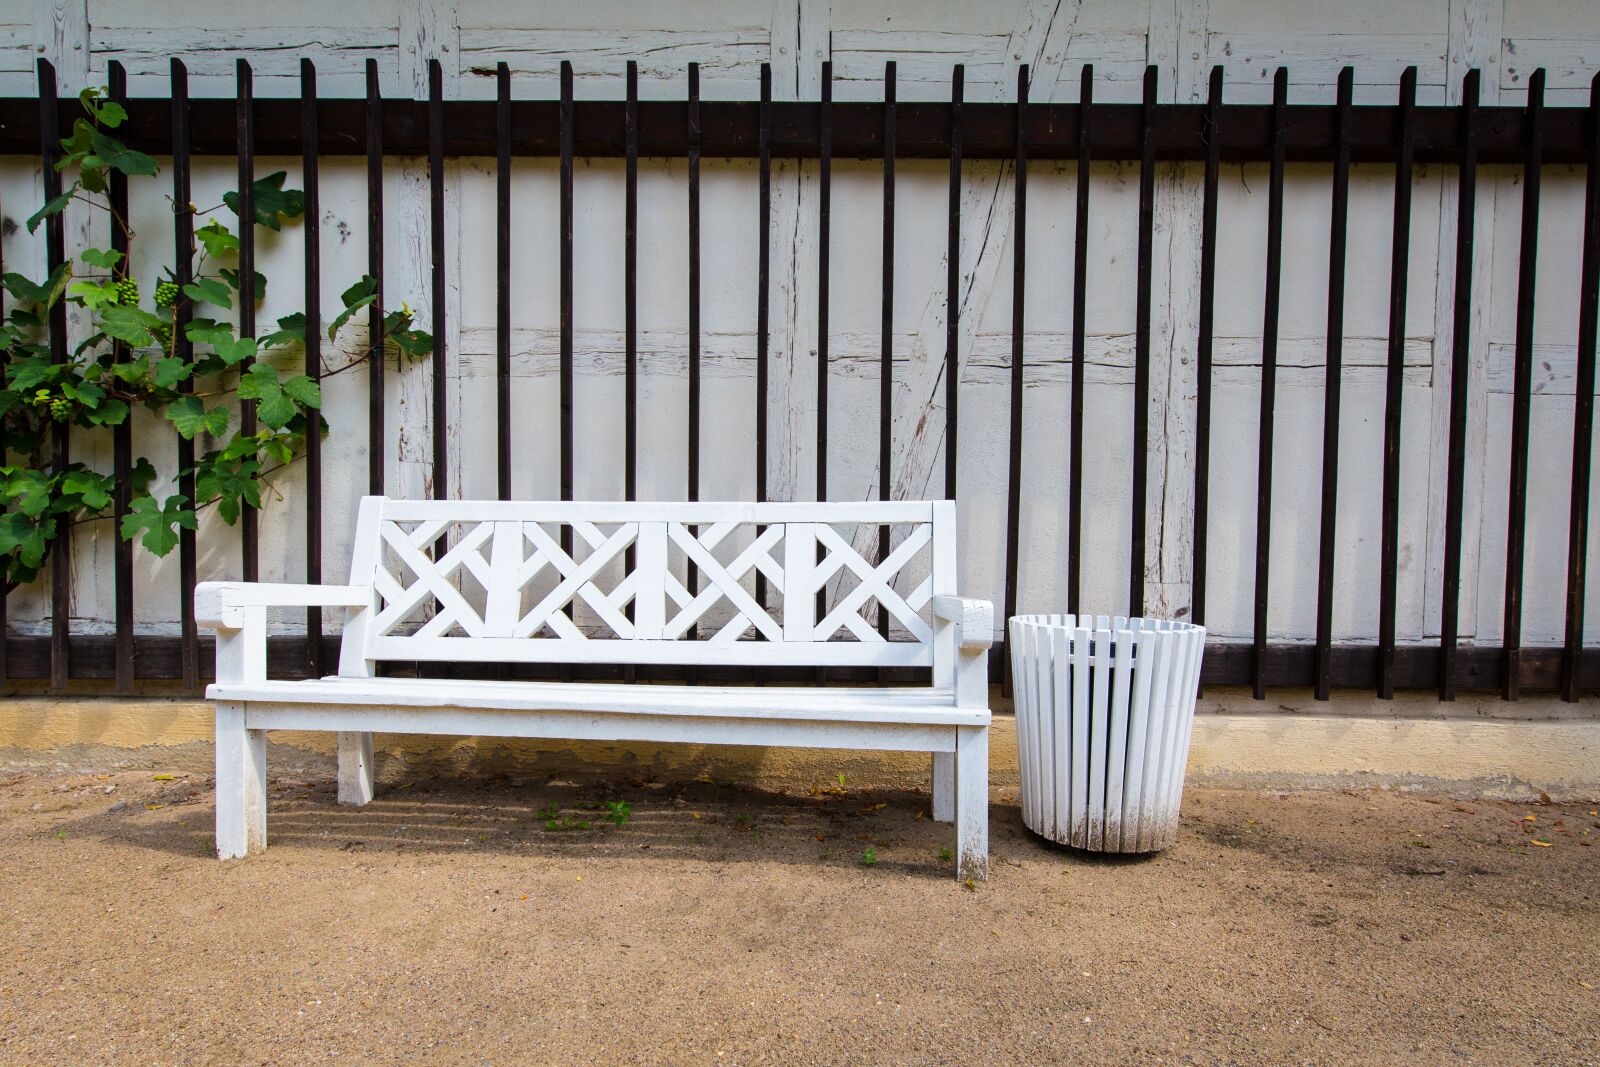 Tamron SP 15-30mm F2.8 Di VC USD sample photo. Park bench, garbage can photography